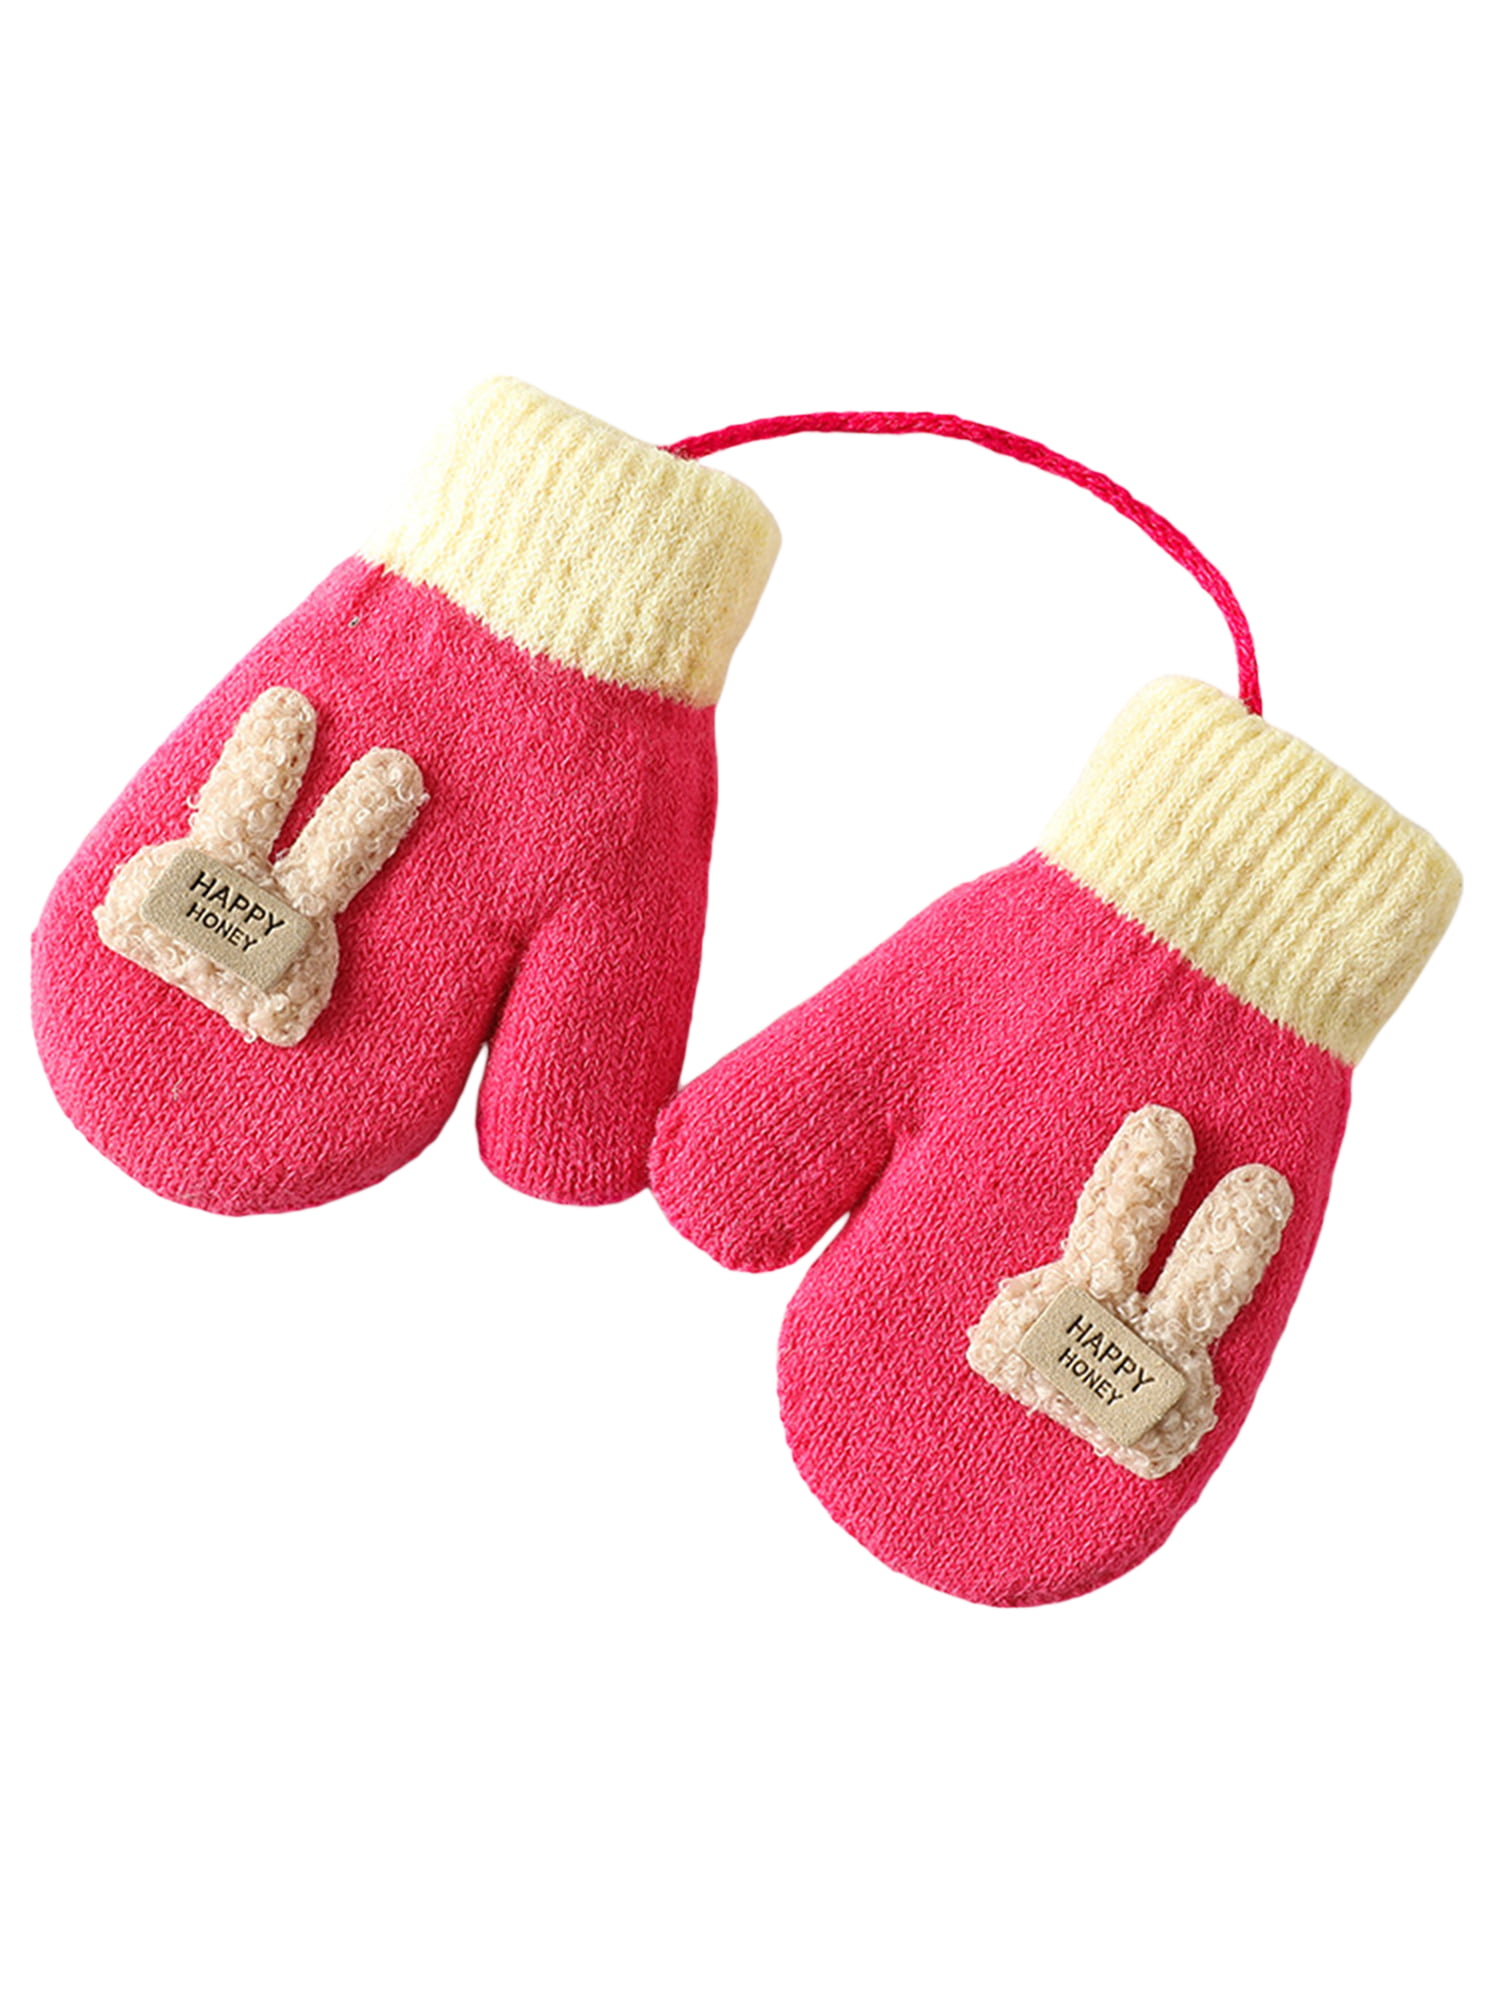 Warm Kids Fleece lined Mittens Soft Winter Knitted Gloves Cute Rabbit Full Finger Stretchy for Toddlers